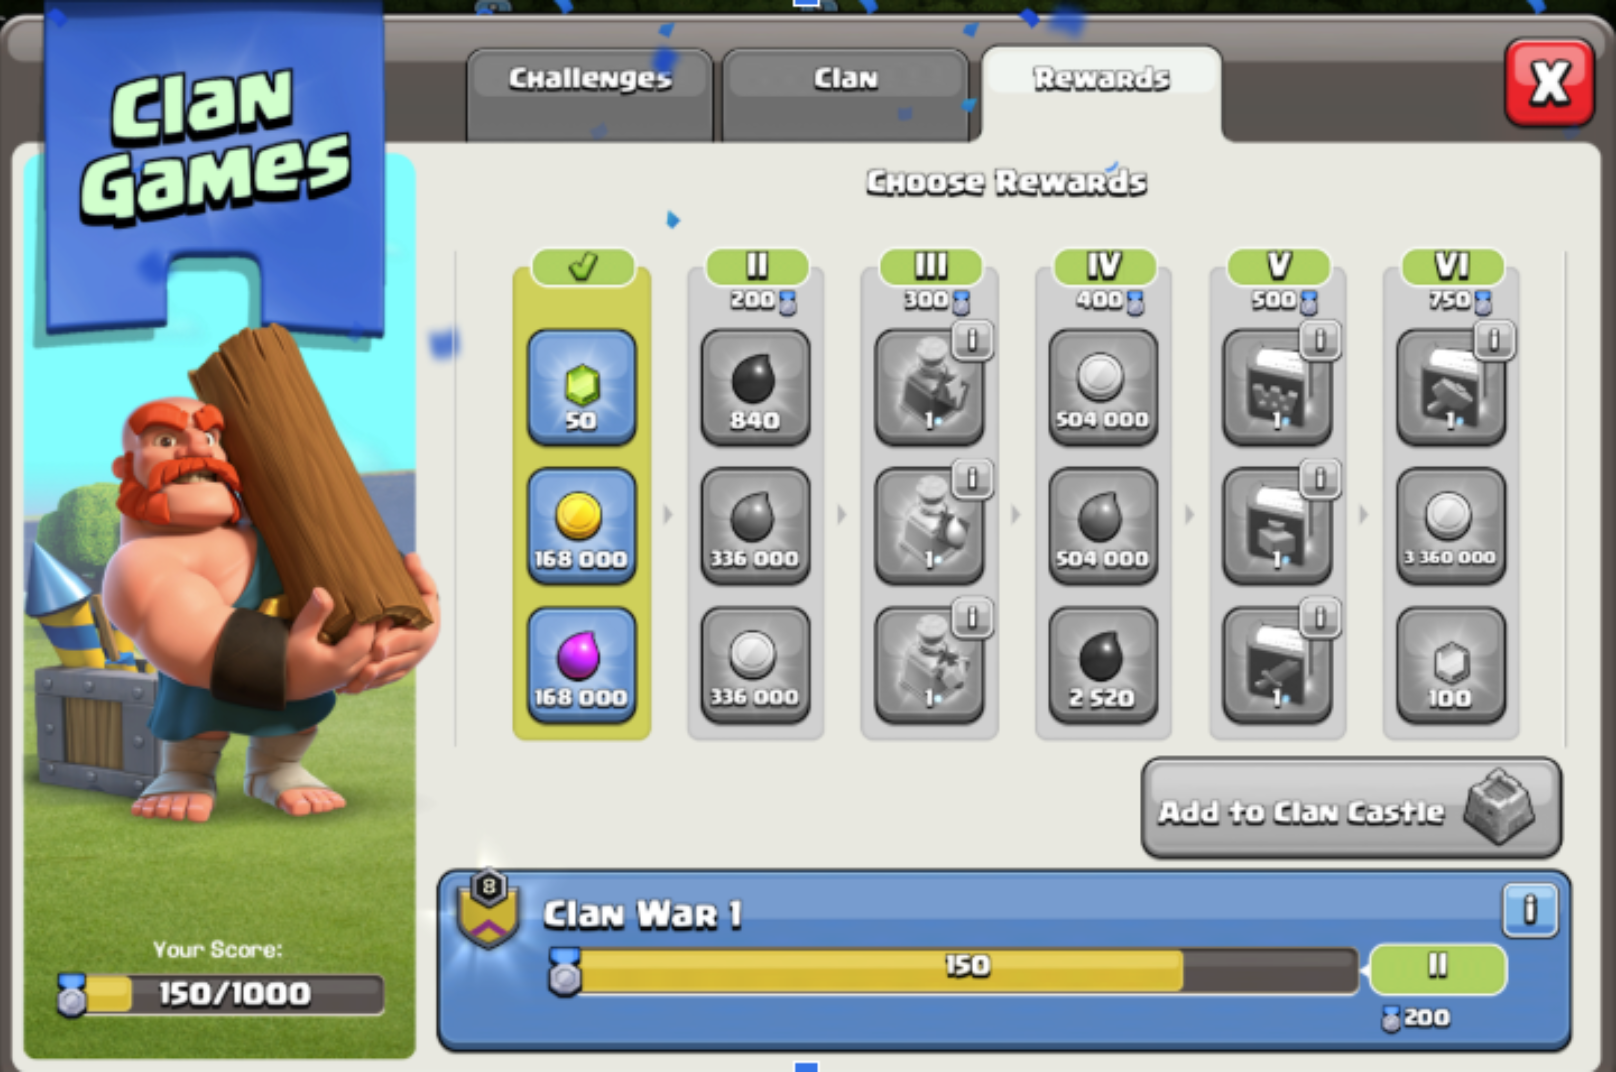 GOOGLE PLAY GAMES PC GIVING FREE REWARDS IN CLASH OF CLANS